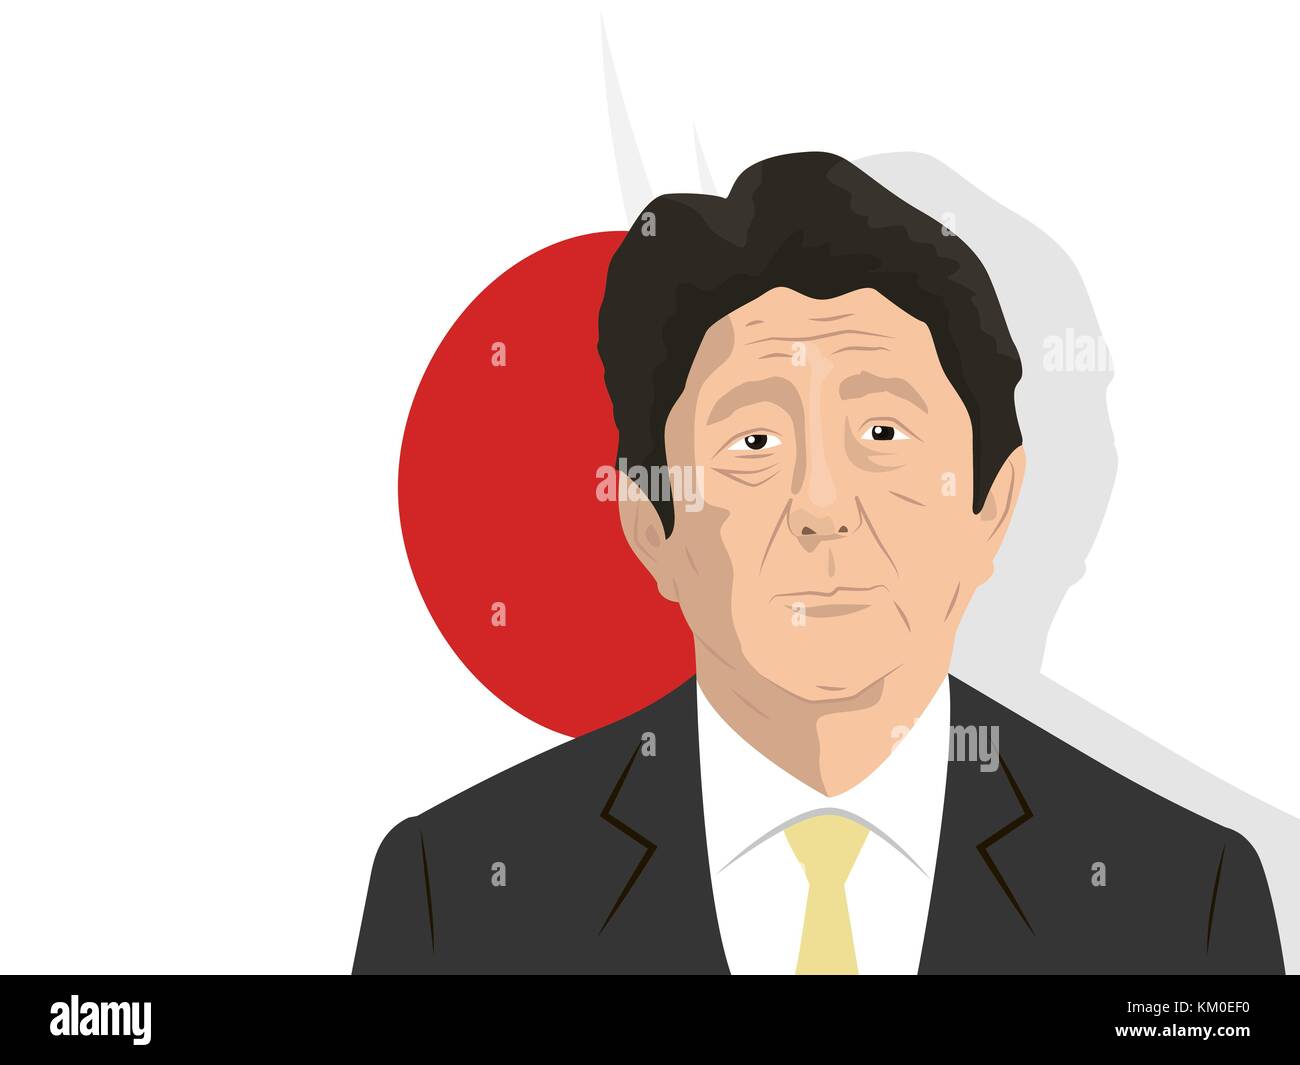 02.12.2017 Editorial illustration of the Prime Minister of Japan Shinzo Abe Stock Vector